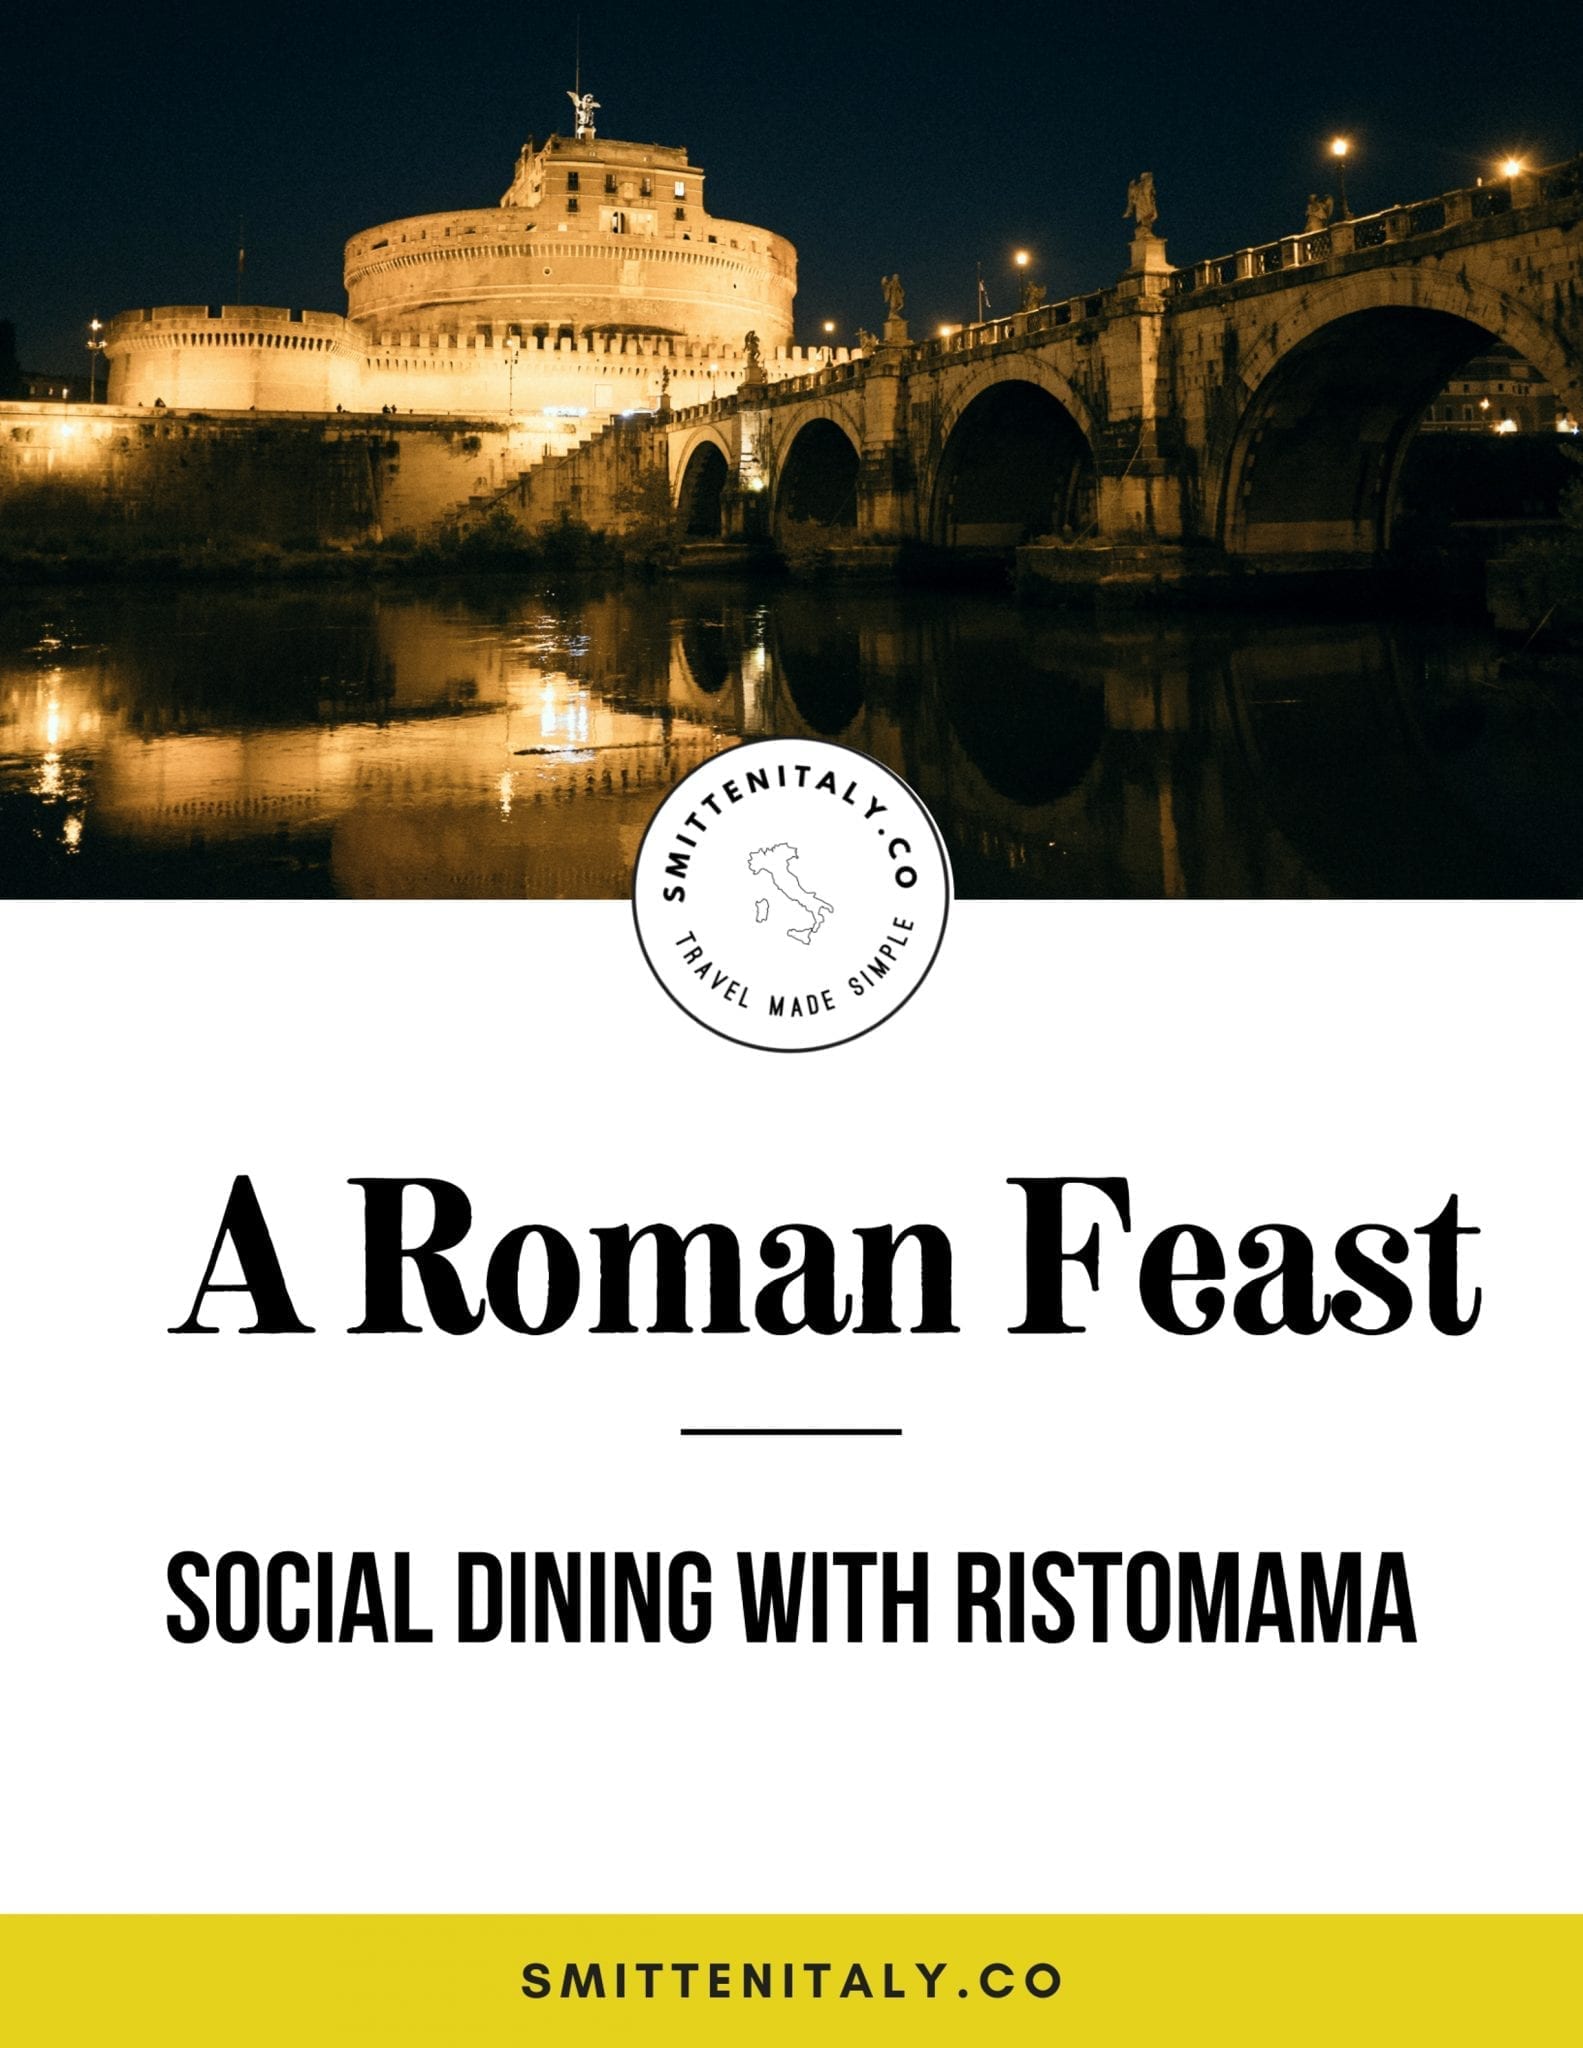 Social Dining with Ristomama in Rome